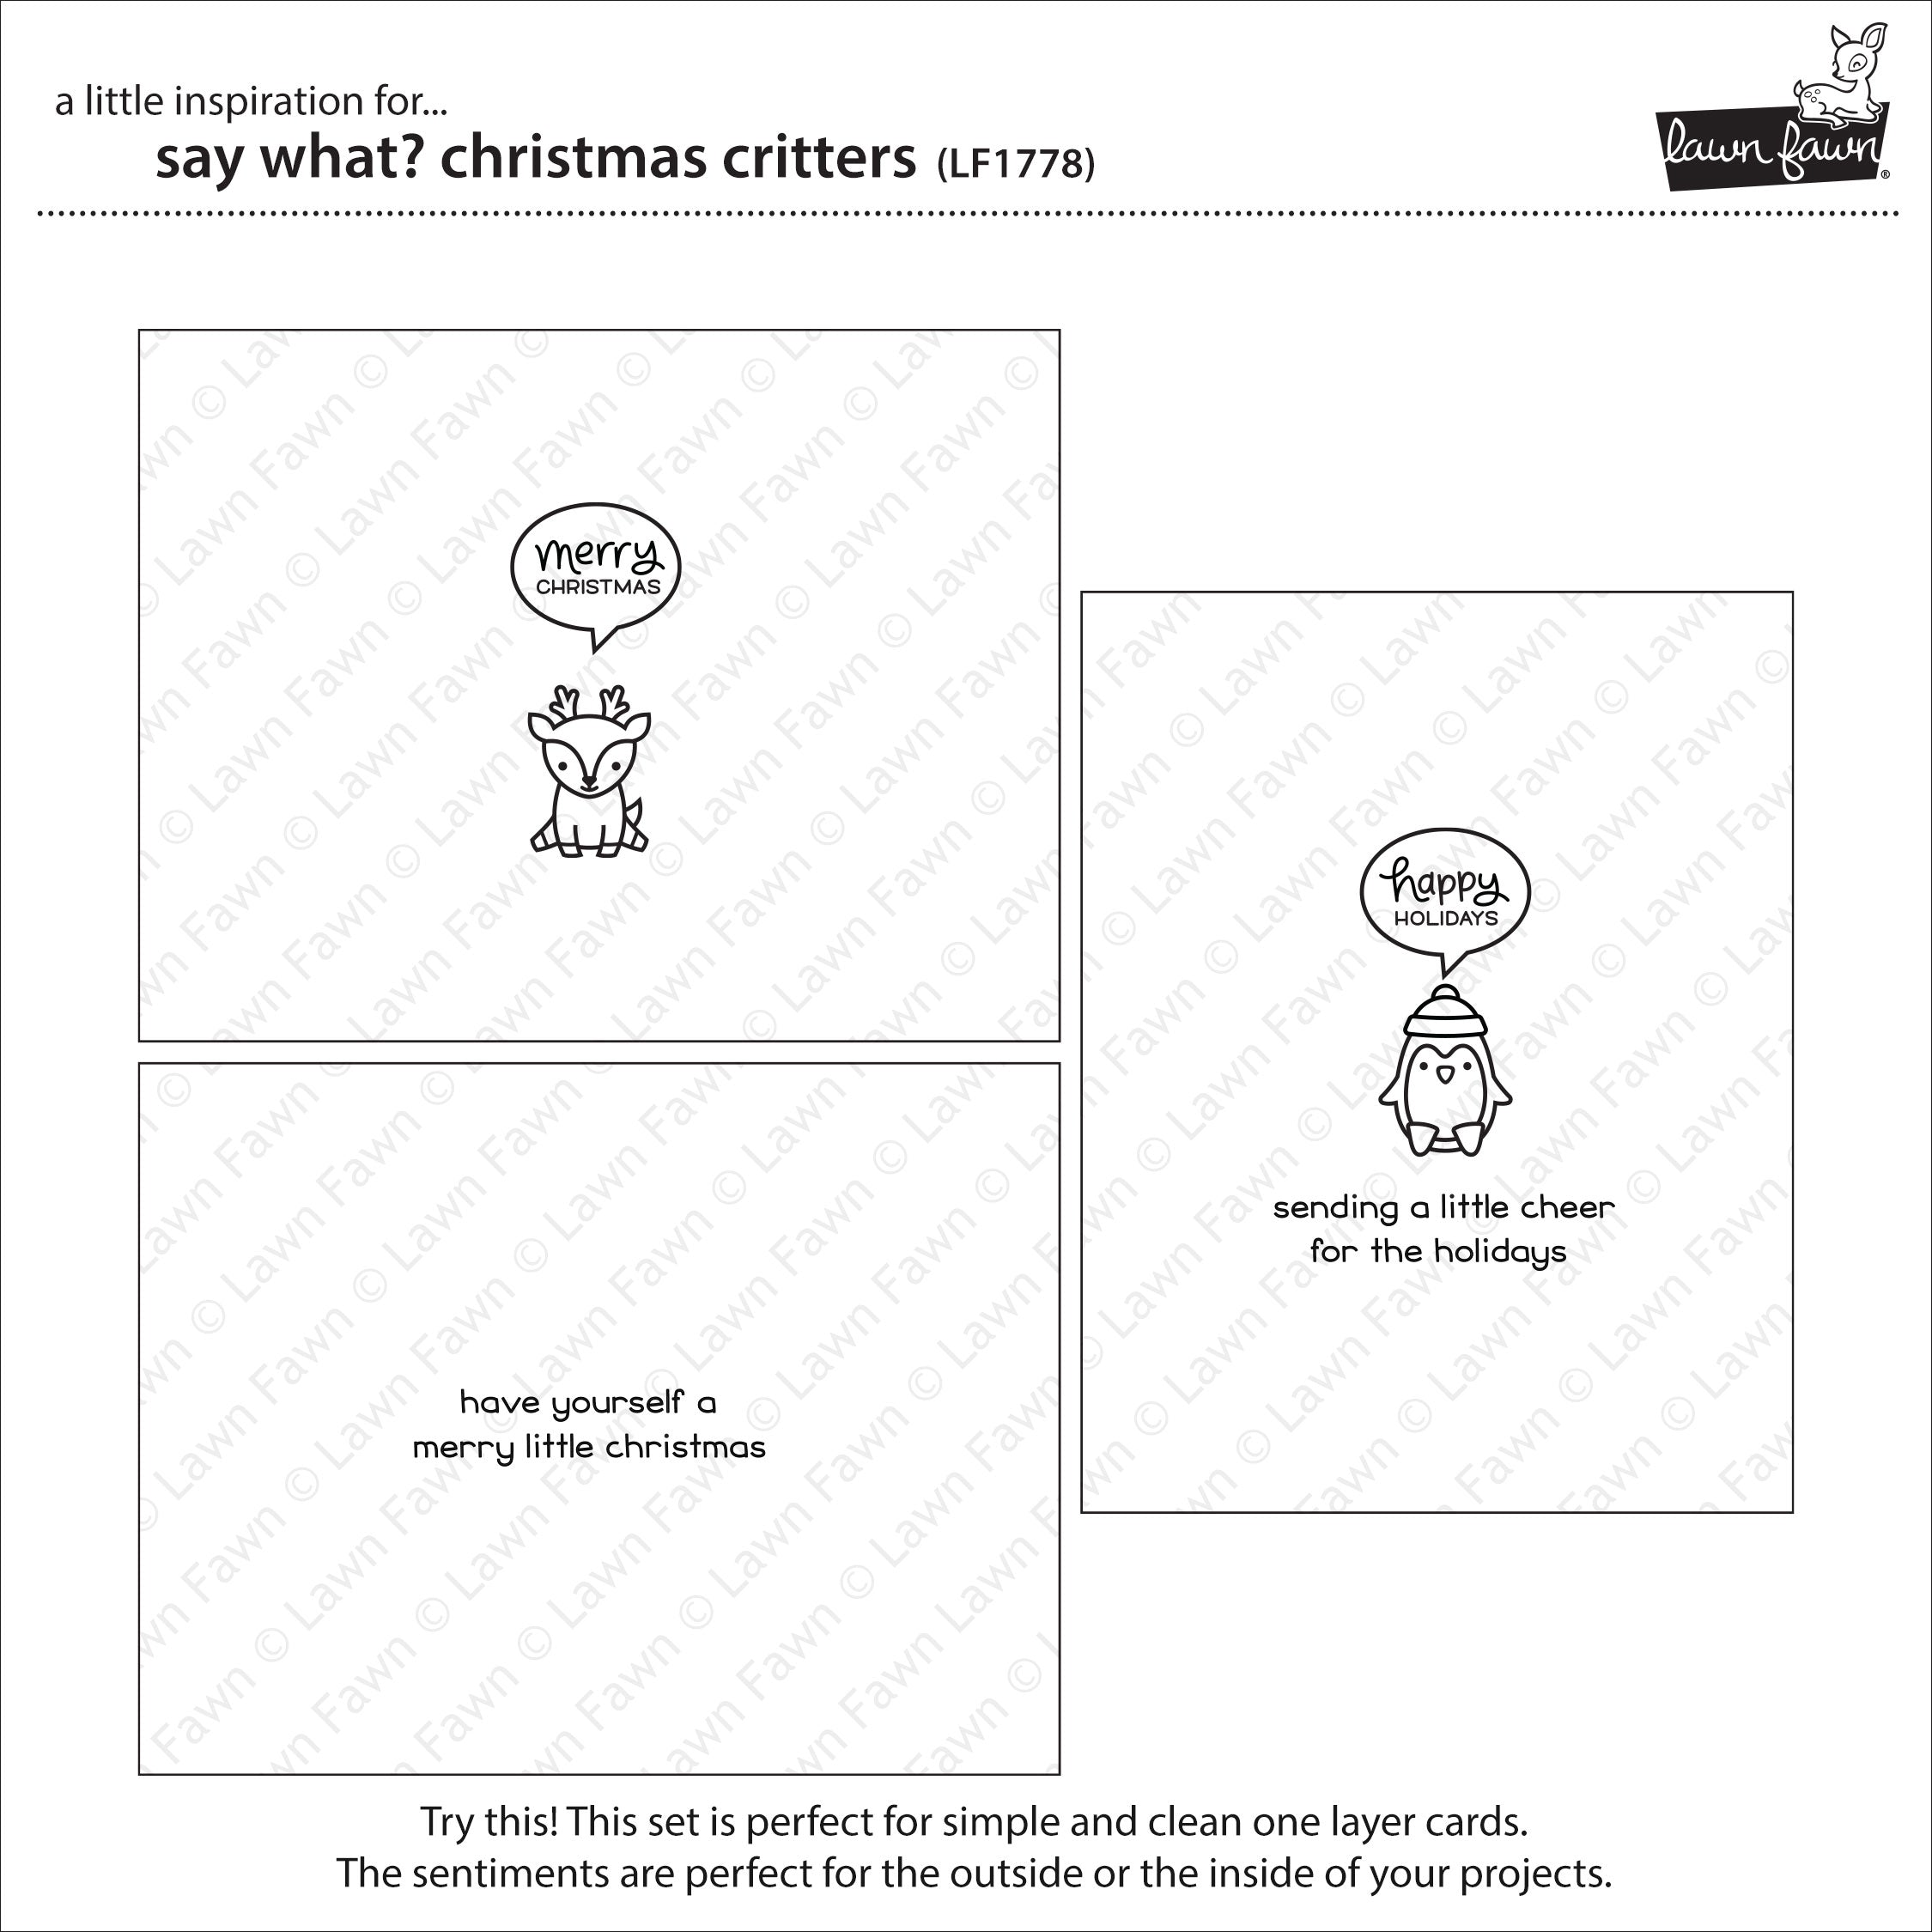 say what? christmas critters